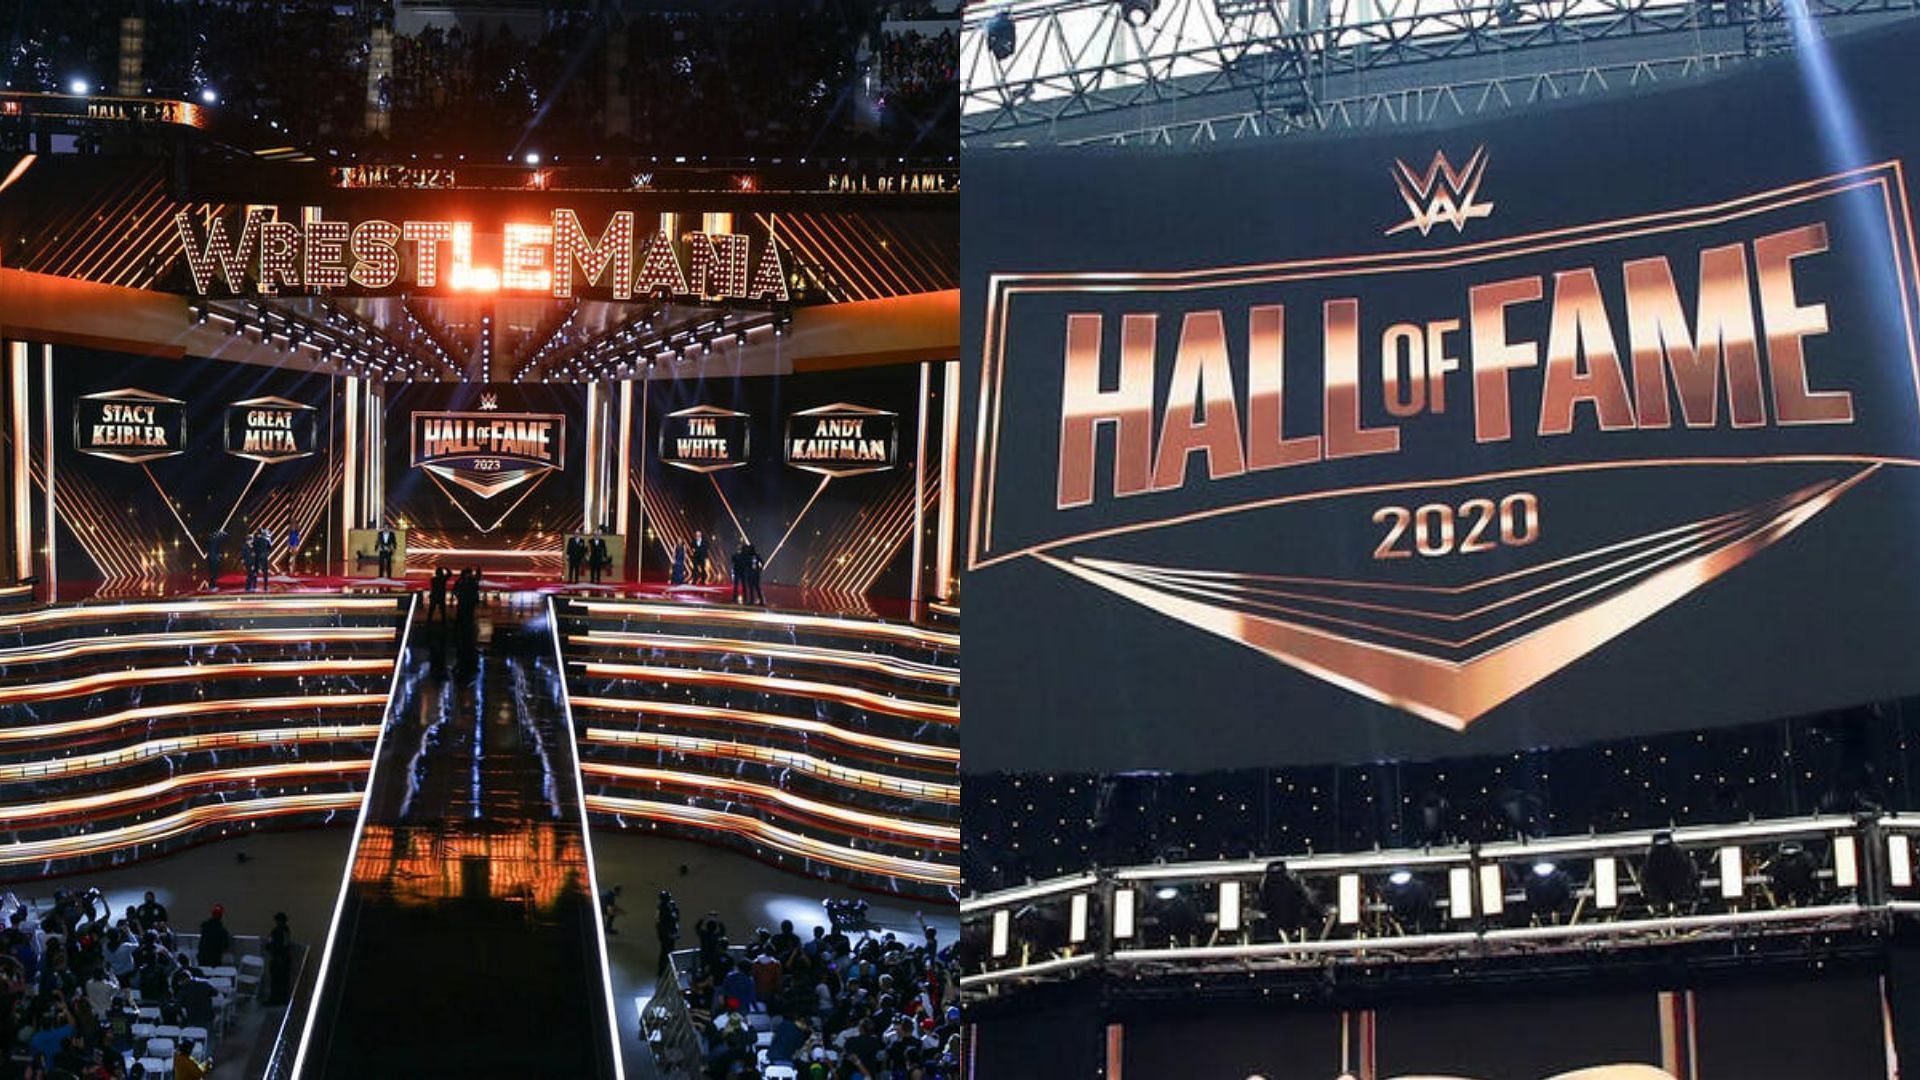 WWE has confirmed that the second Hall of Fame inductee for 2024